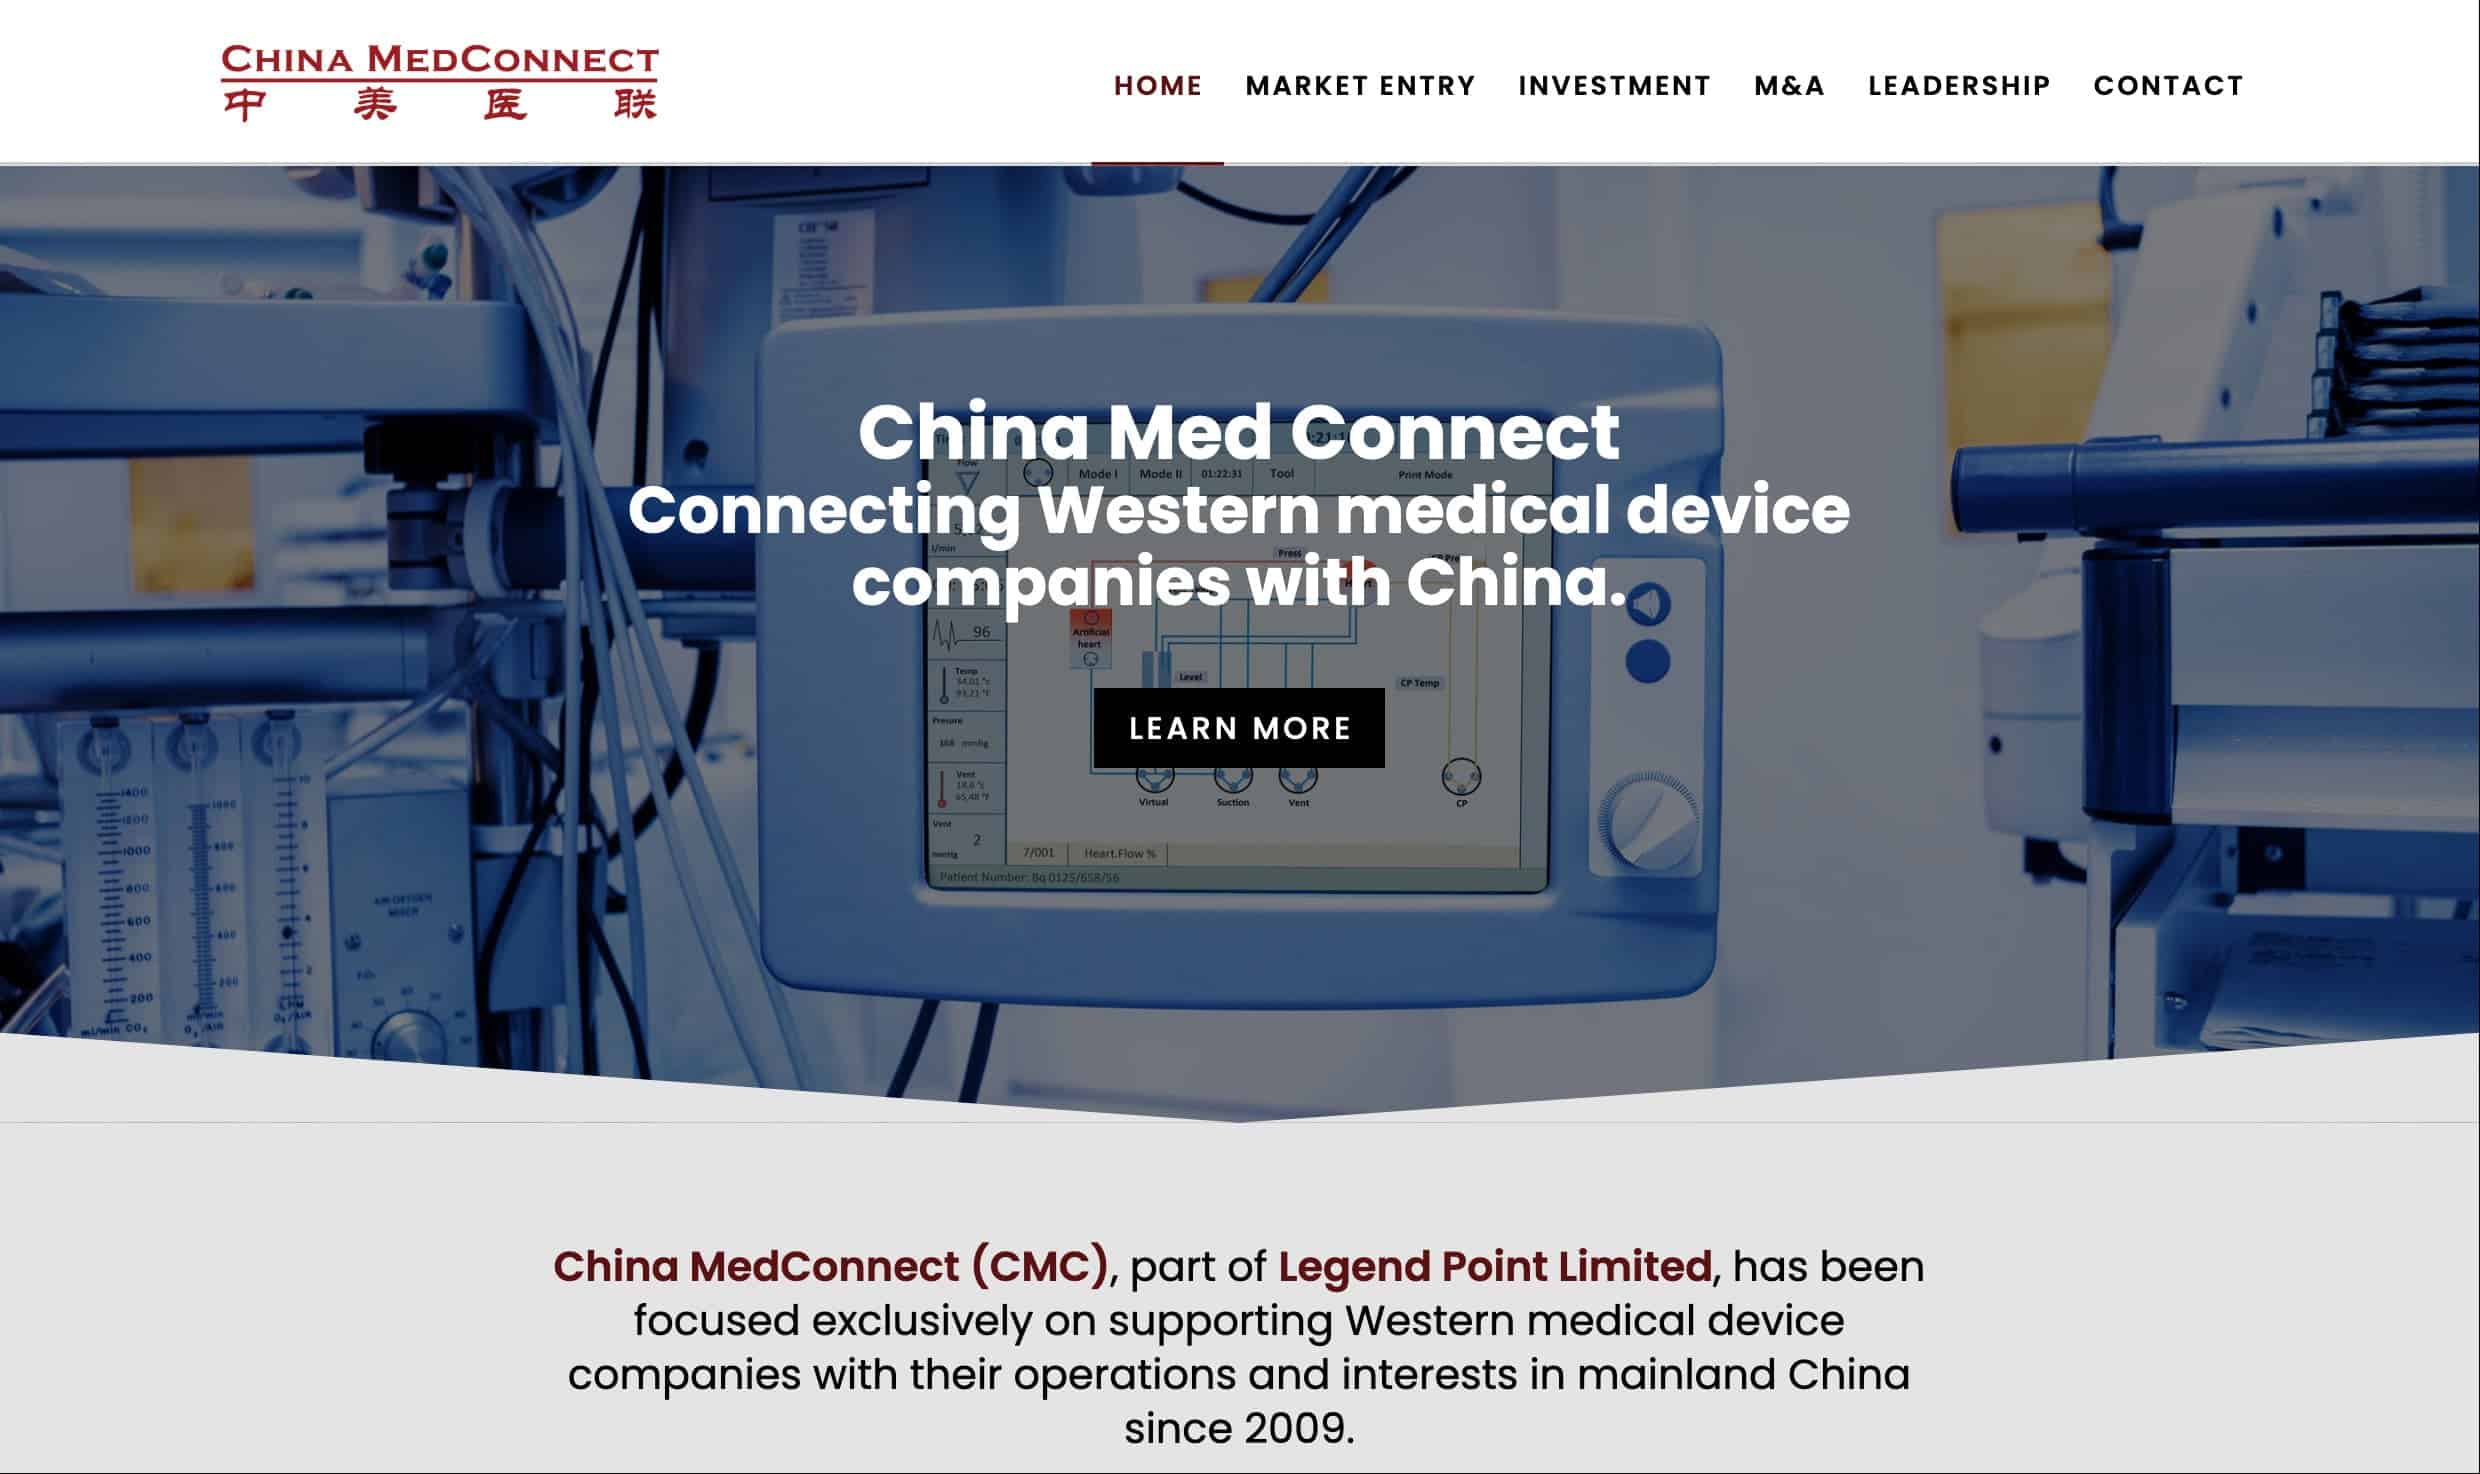 China Med Connect homepage showing medical equipment